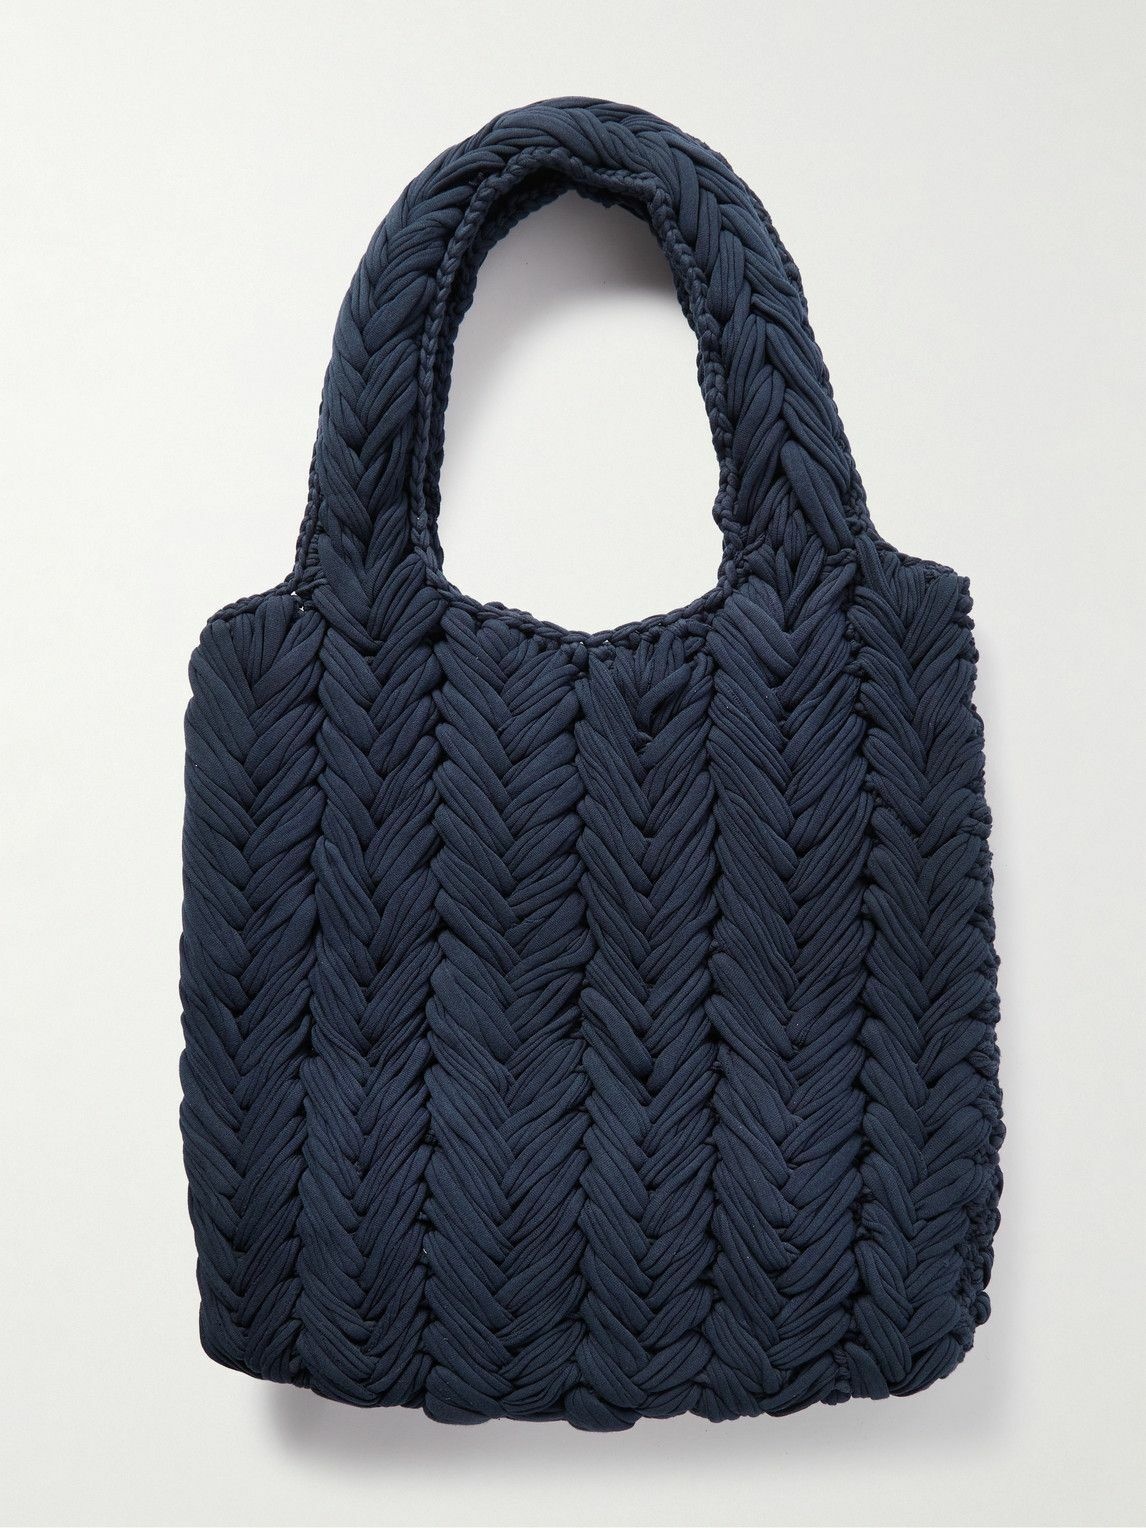 JW Anderson - Reversible Leather-Trimmed Crocheted Cotton Tote Bag JW ...